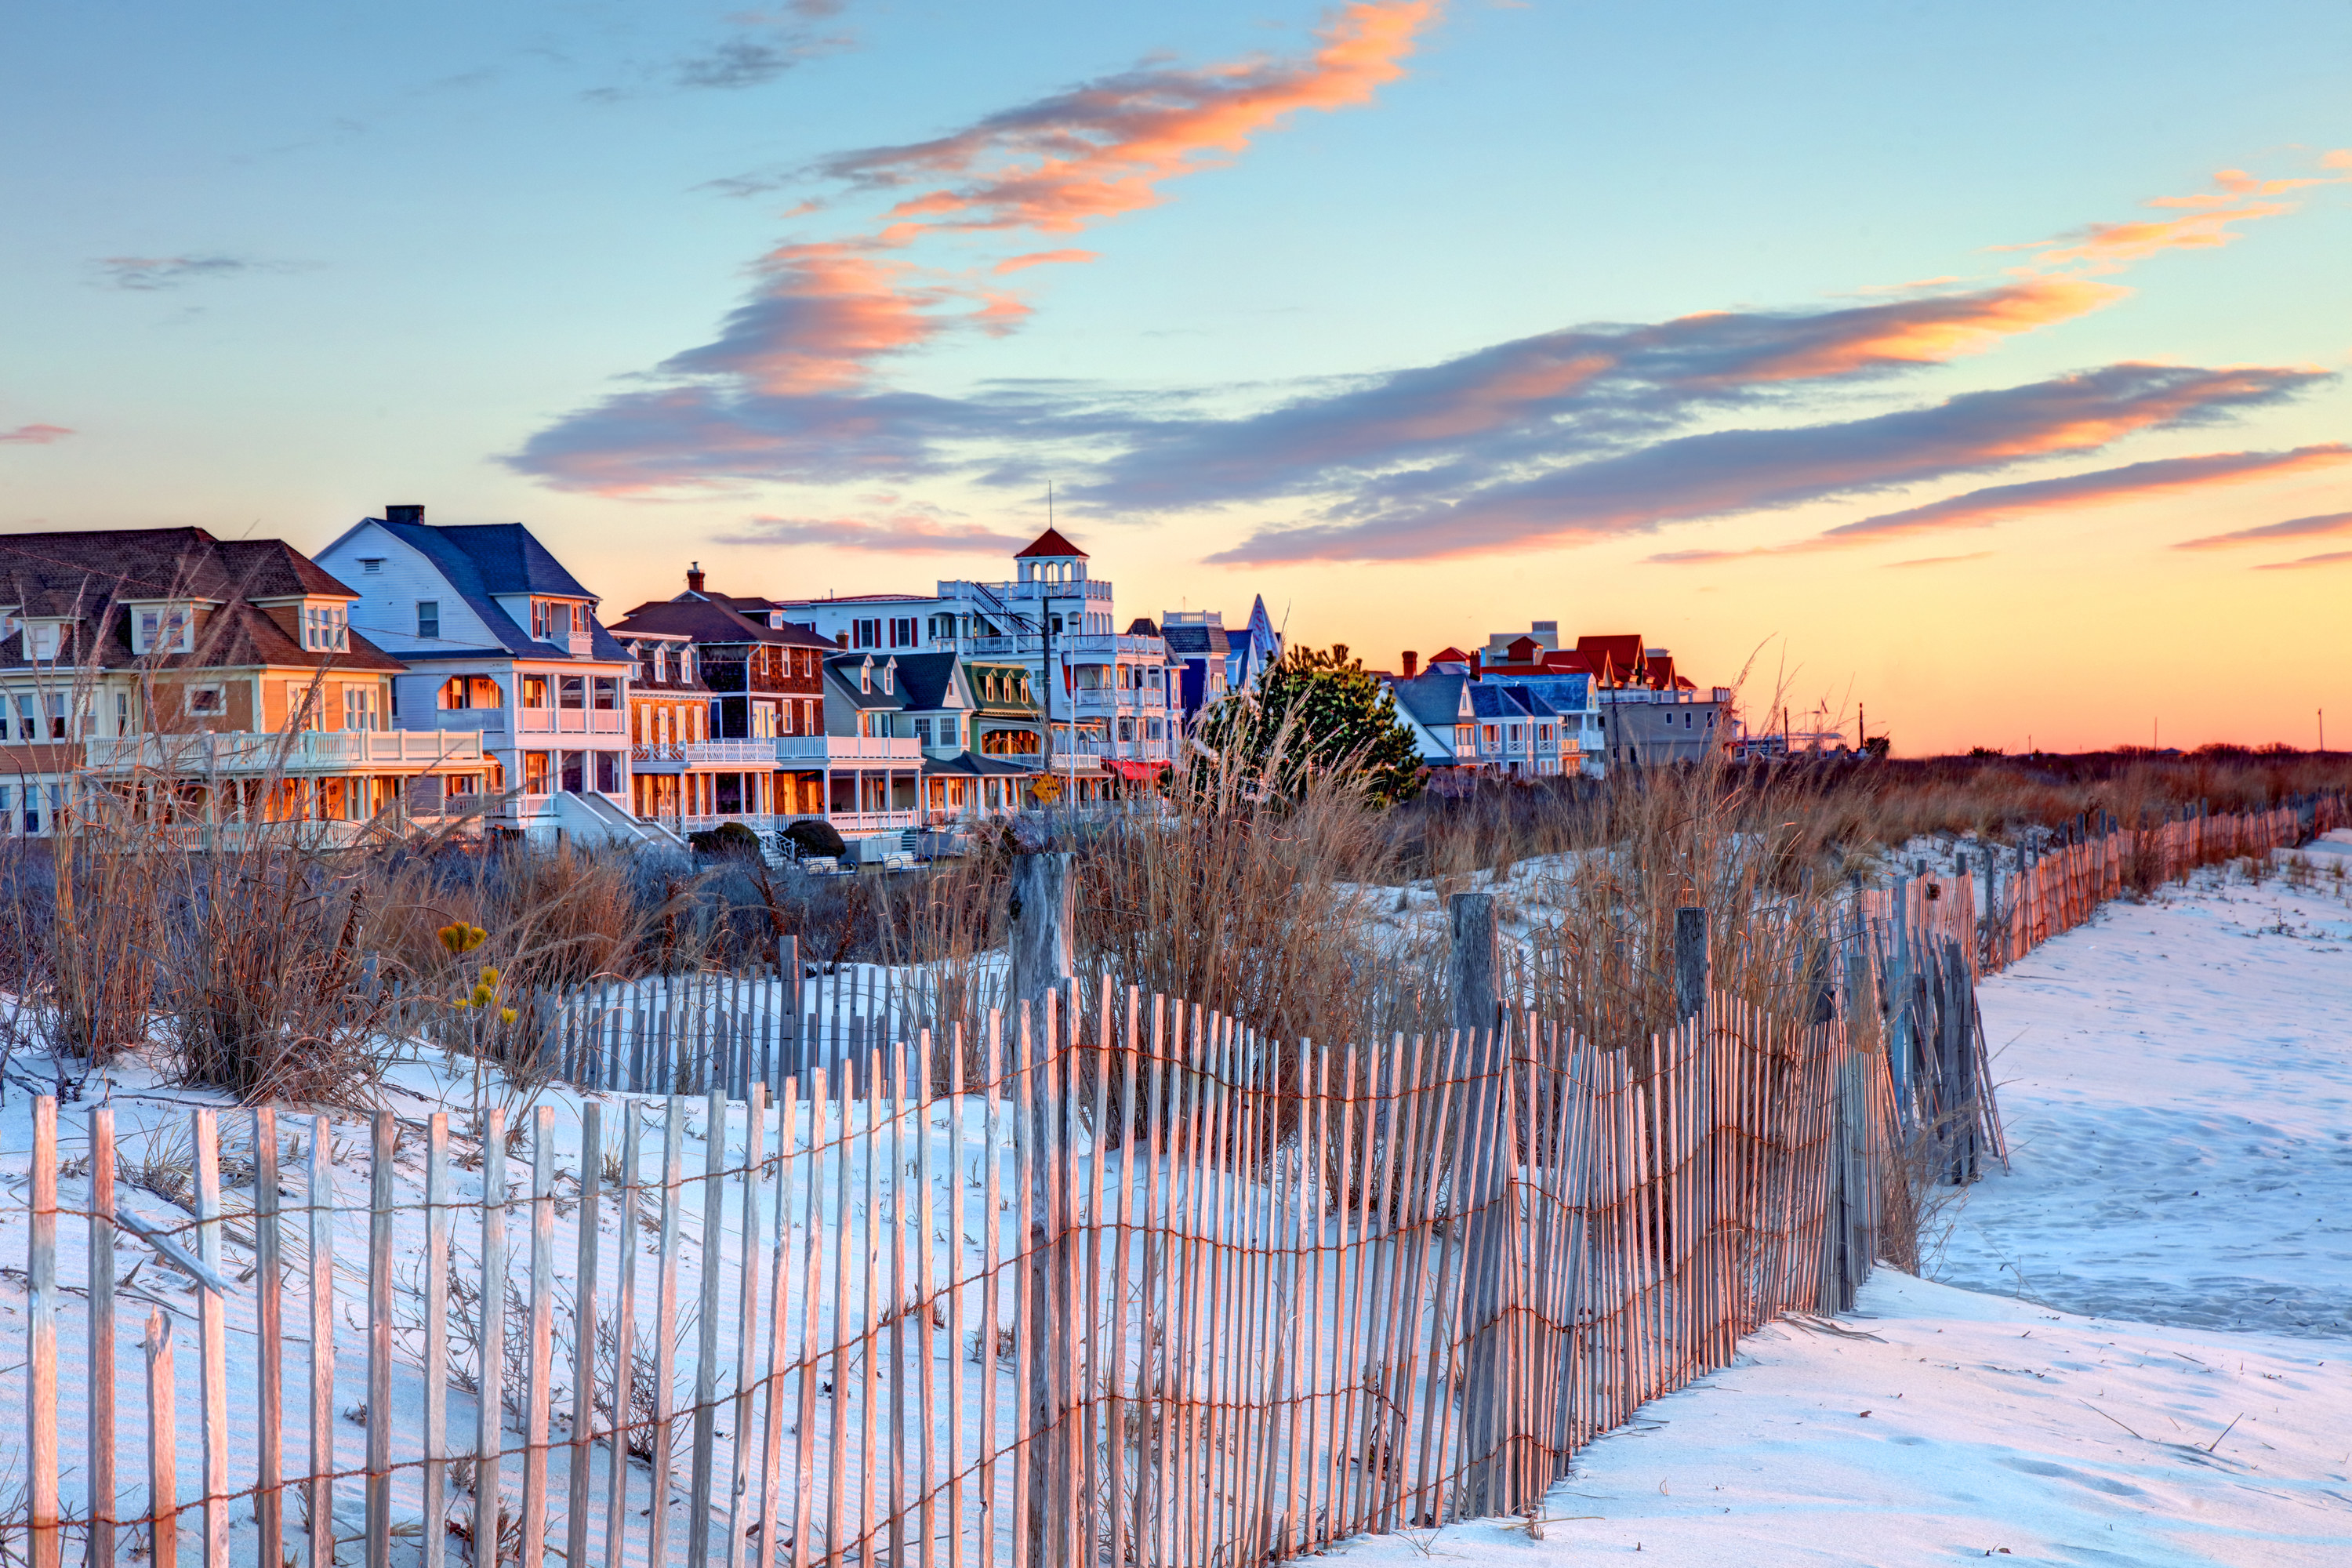 Beach dune and houses in cape may, NJ at sunset